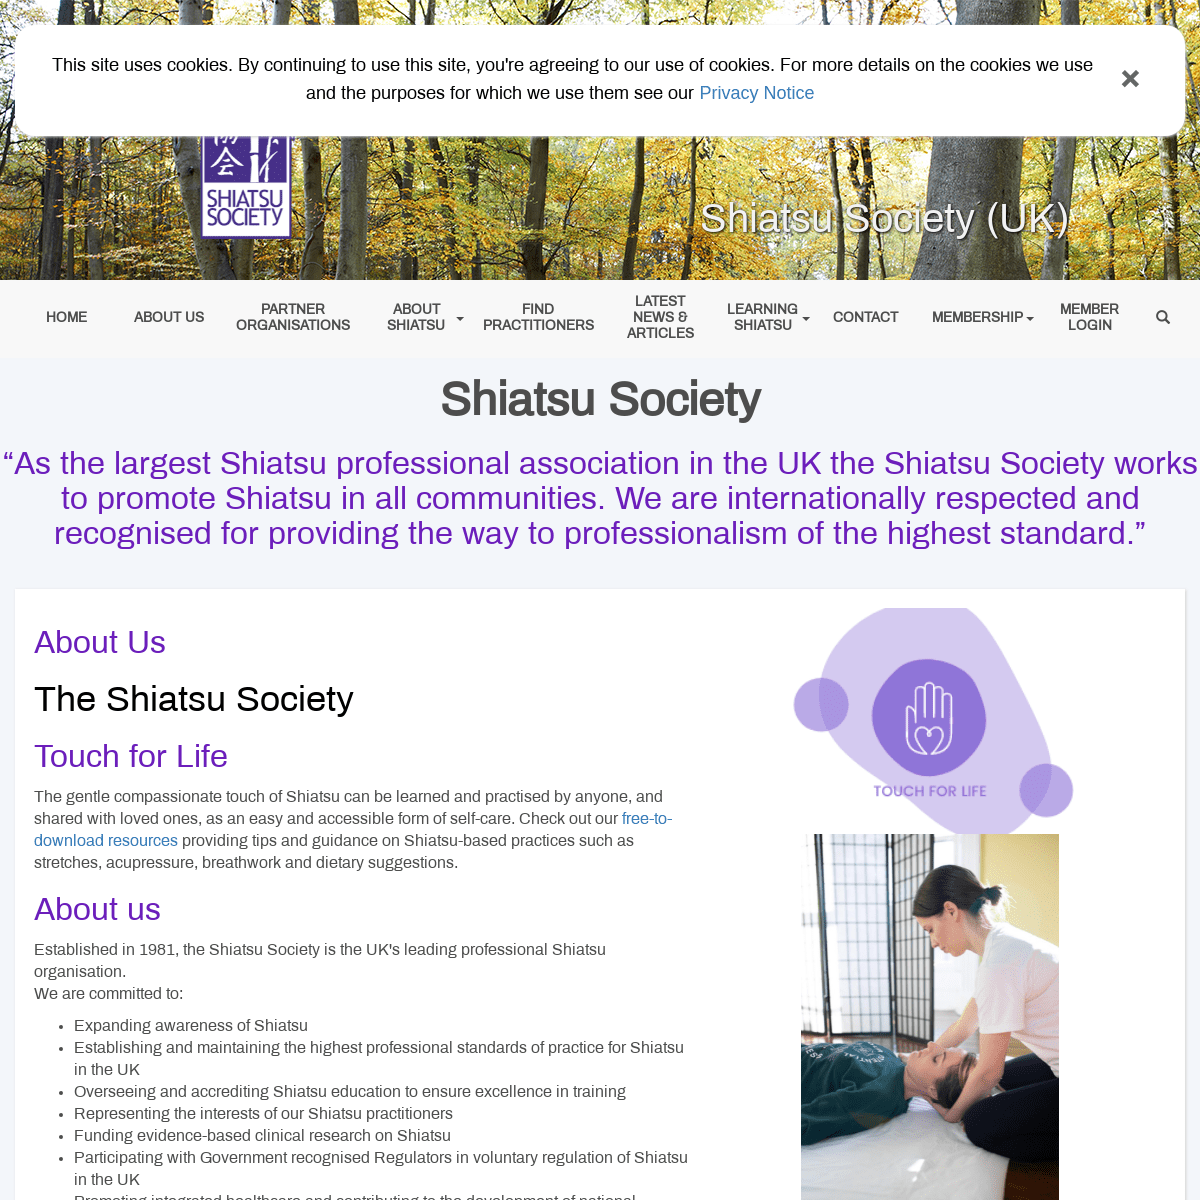 A complete backup of https://shiatsusociety.org